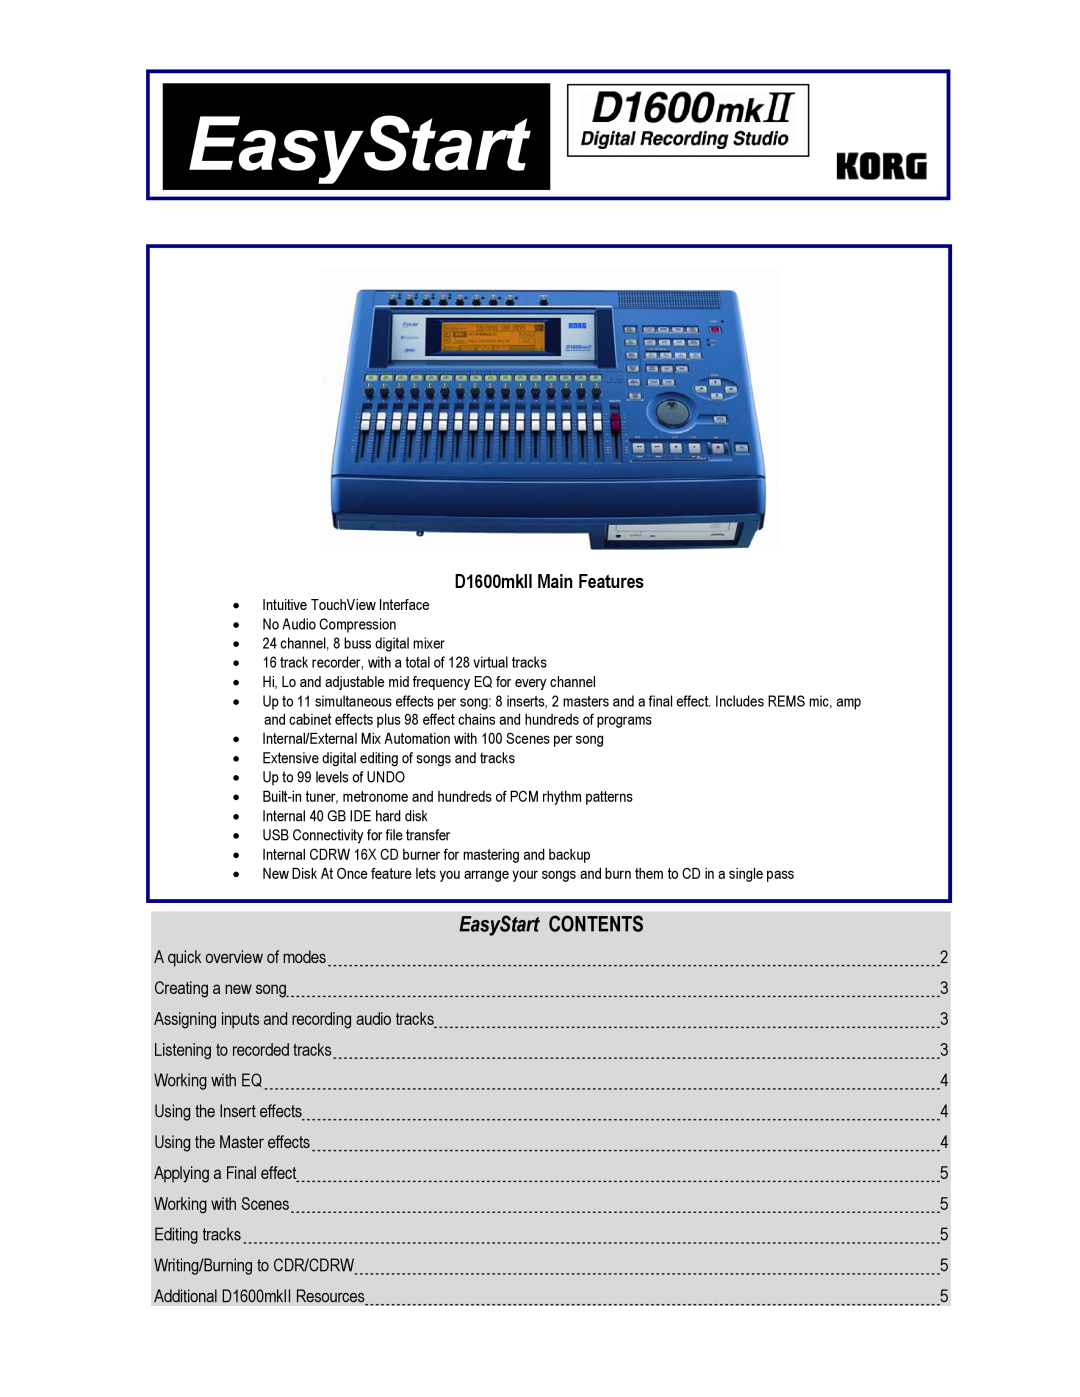 Korg manual D1600mkII Main Features, EasyStart CONTENTS 